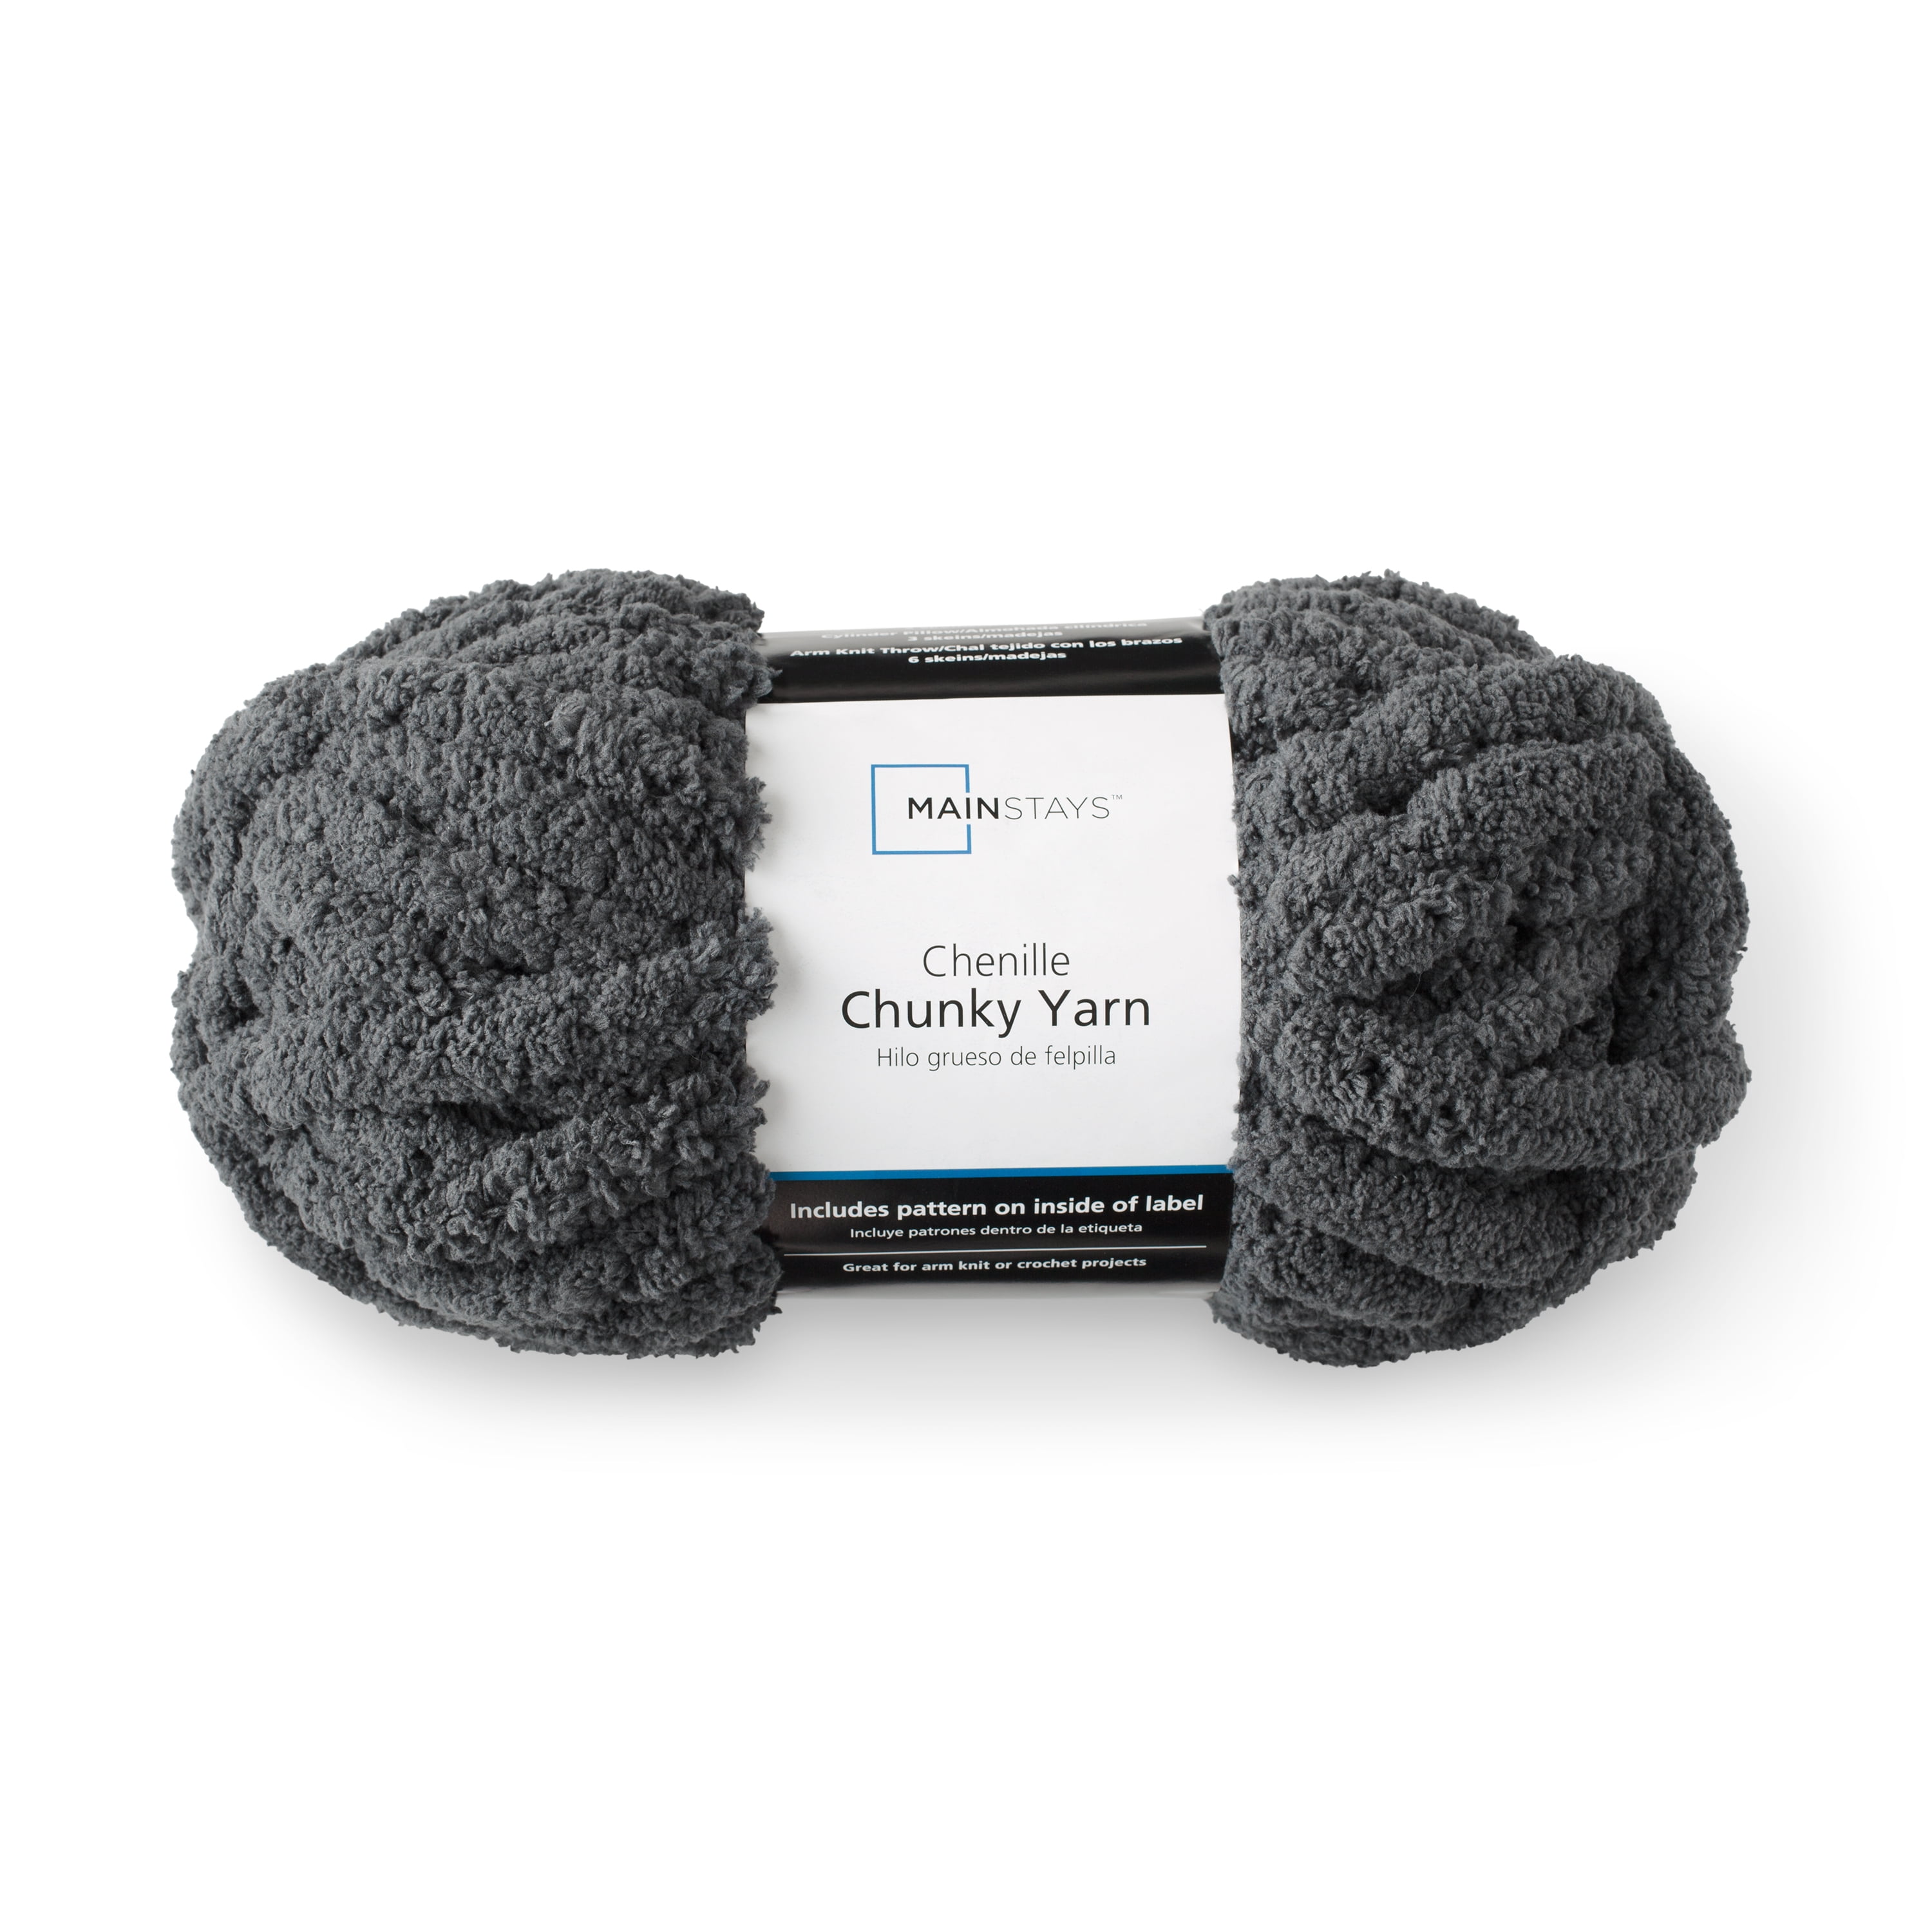 Mainstays chenille chunky yarn charcoal gray lot of 2 steins